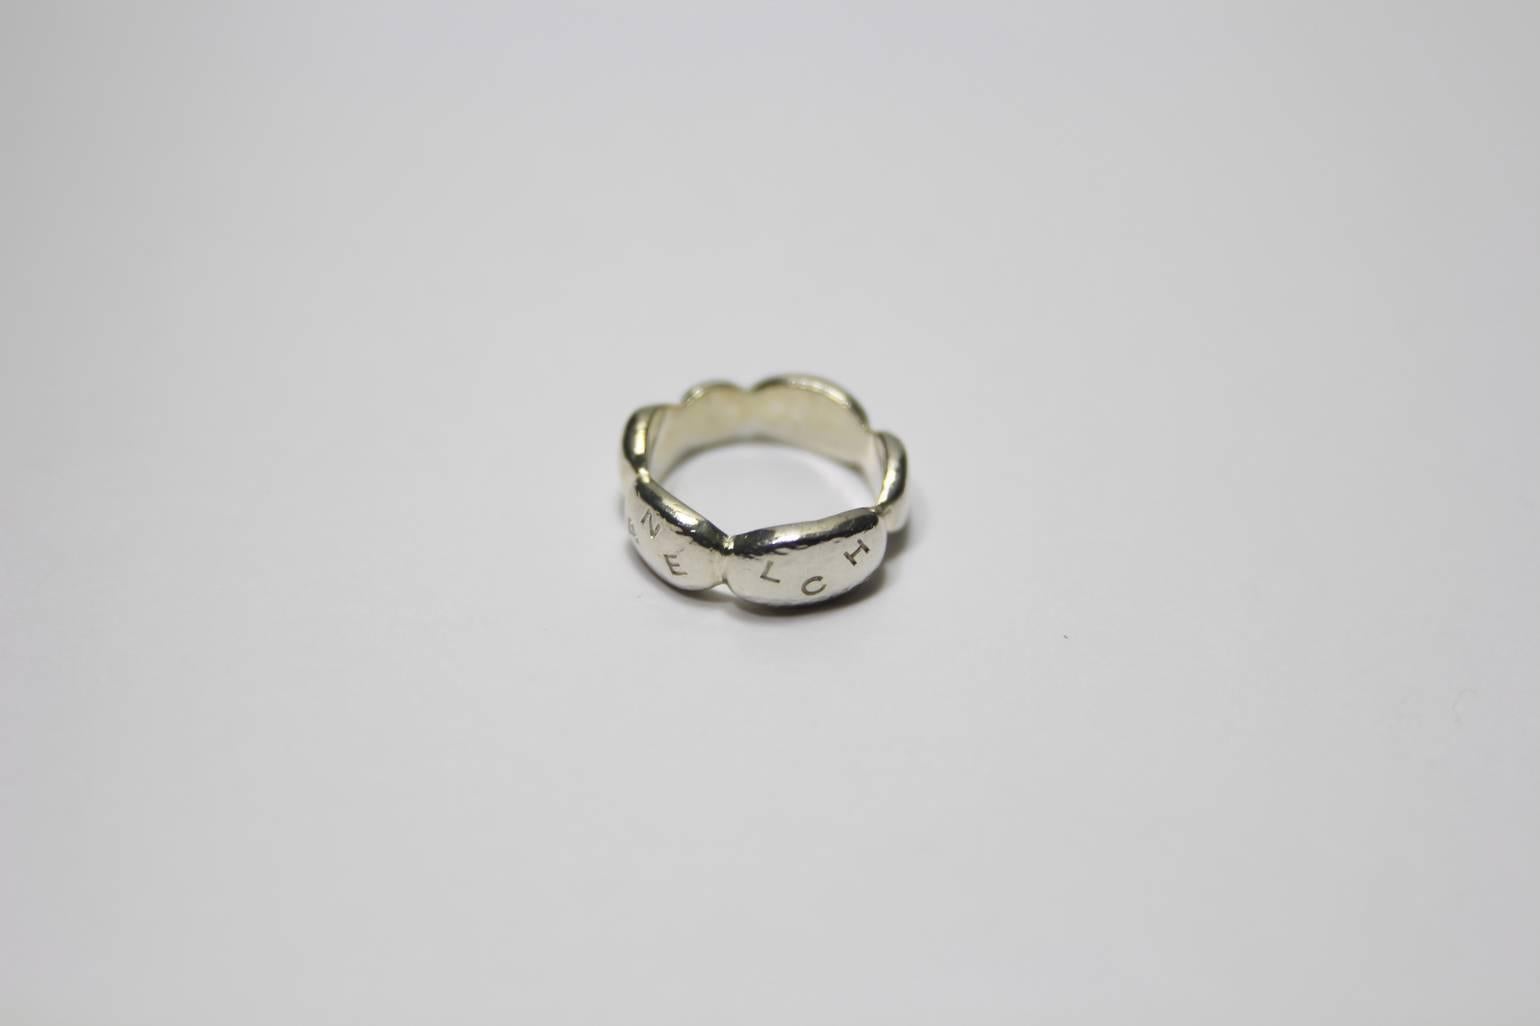 Chanel INITIALE Vintage Ring
Silver 925 
Size us 12 or 52 europe size
Weight 6.4 g
Its comes with Chanel box and ribbon 
This is a preloved vintage item, therefore it might have imperfections. 
INTERNATIONALS BUYERS CUSTOMS DUTIES AND TAXES ARE